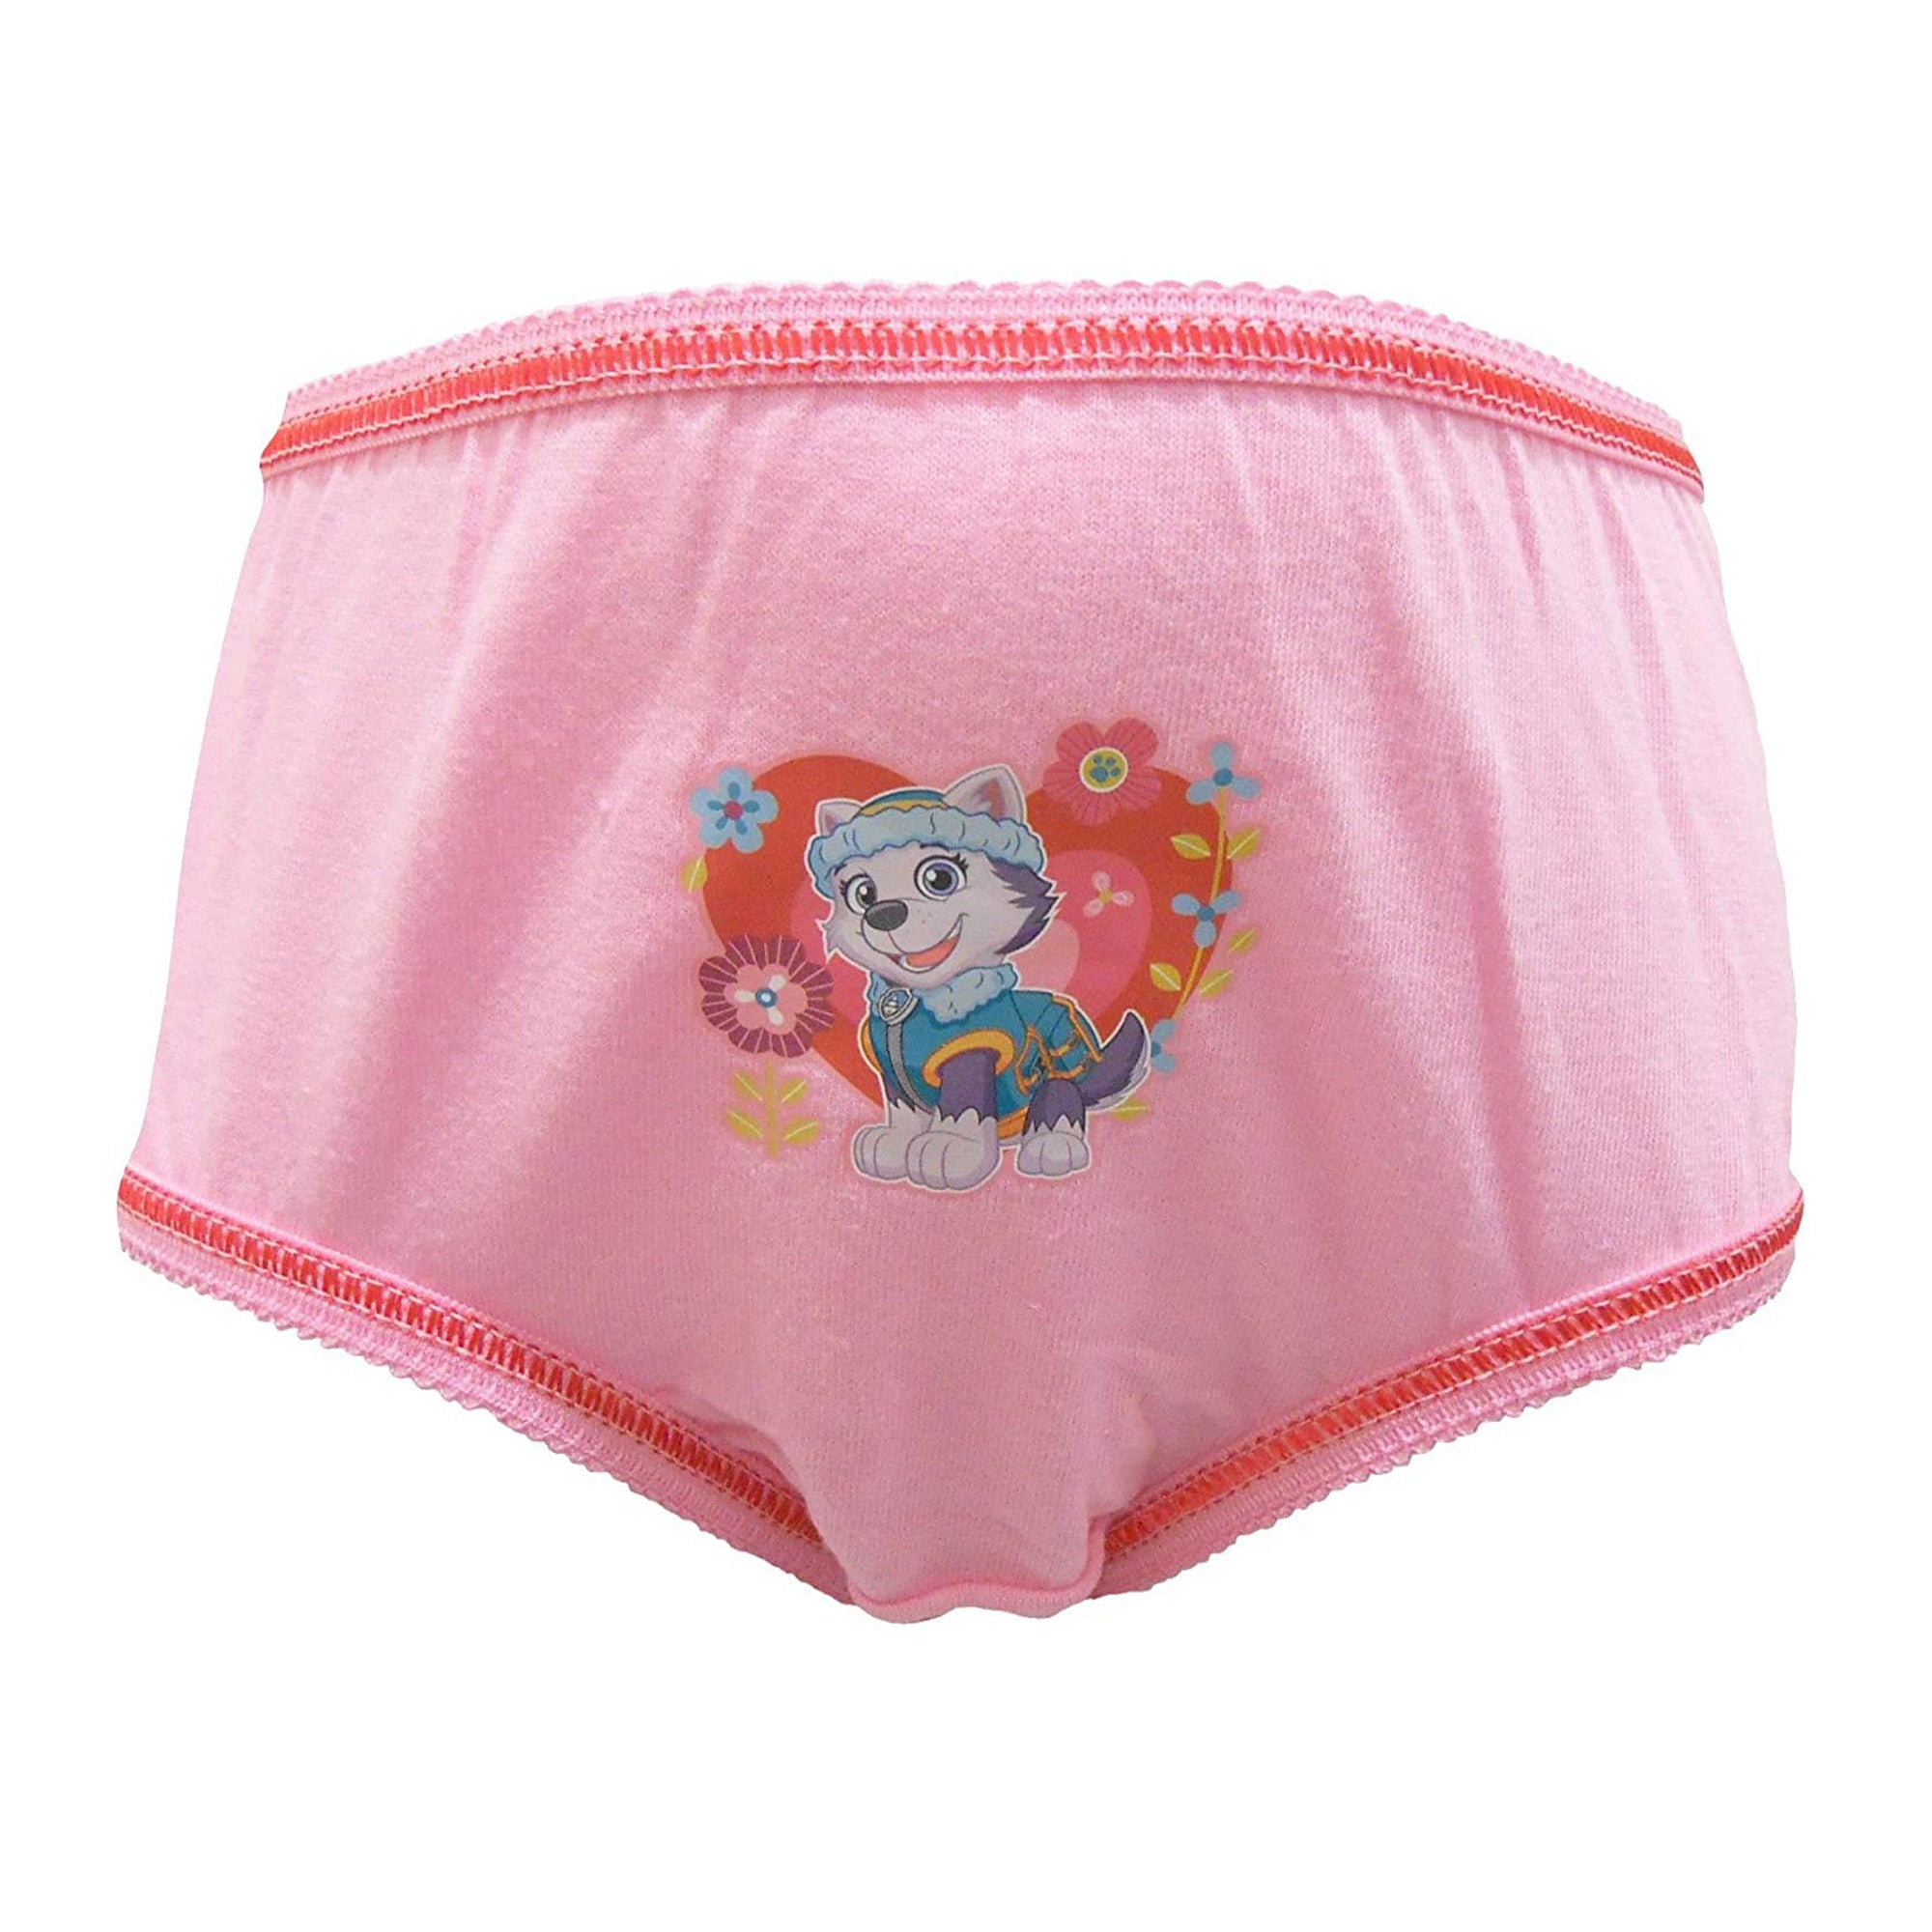 Paw Patrol Pink Knickers featuring Everest